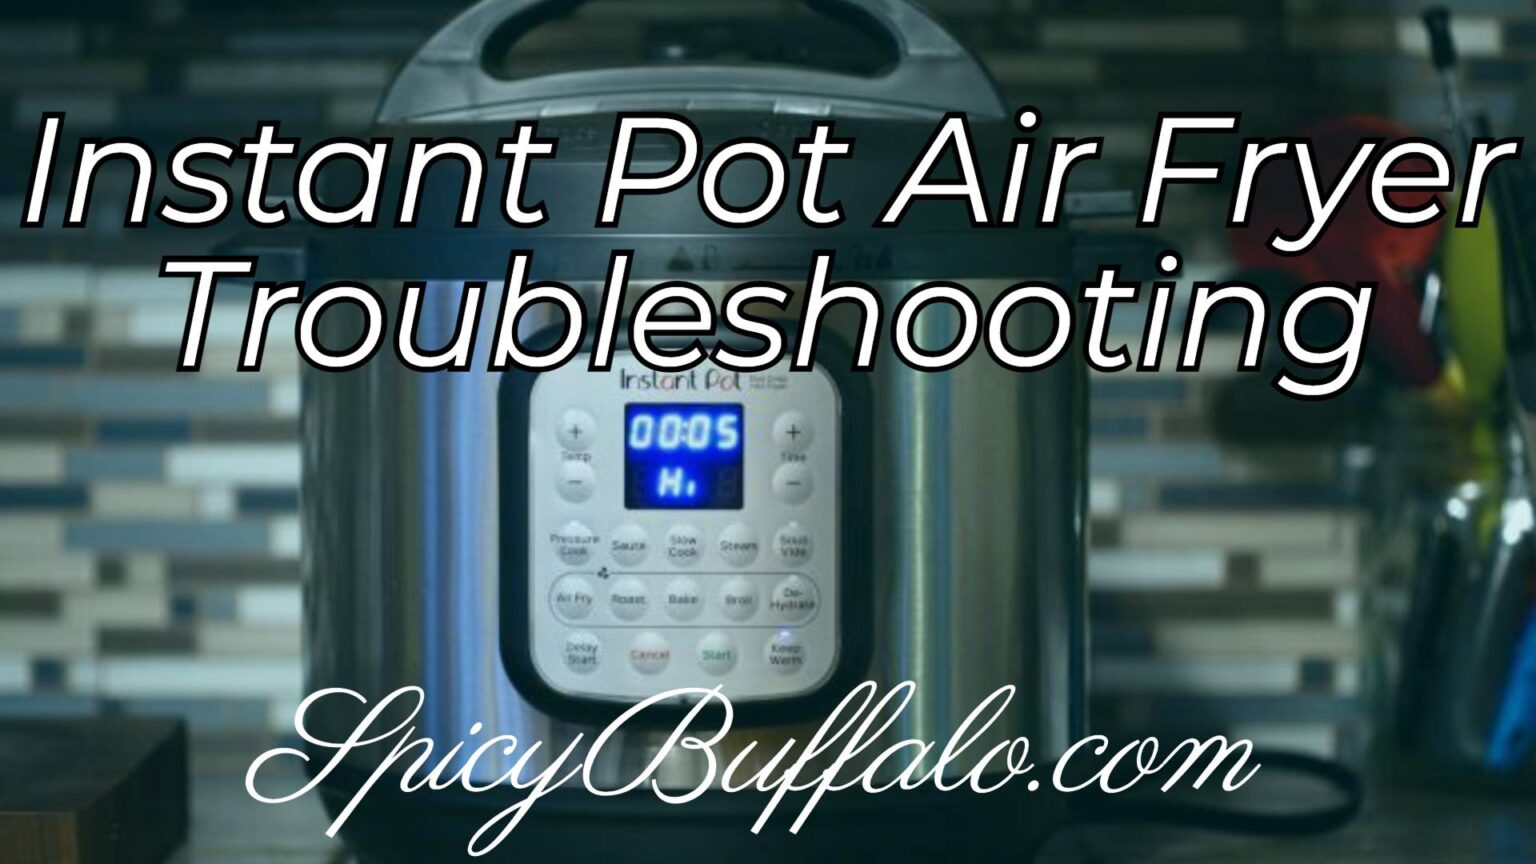 Instant Pot Air Fryer Troubleshooting | Spicy Buffalo